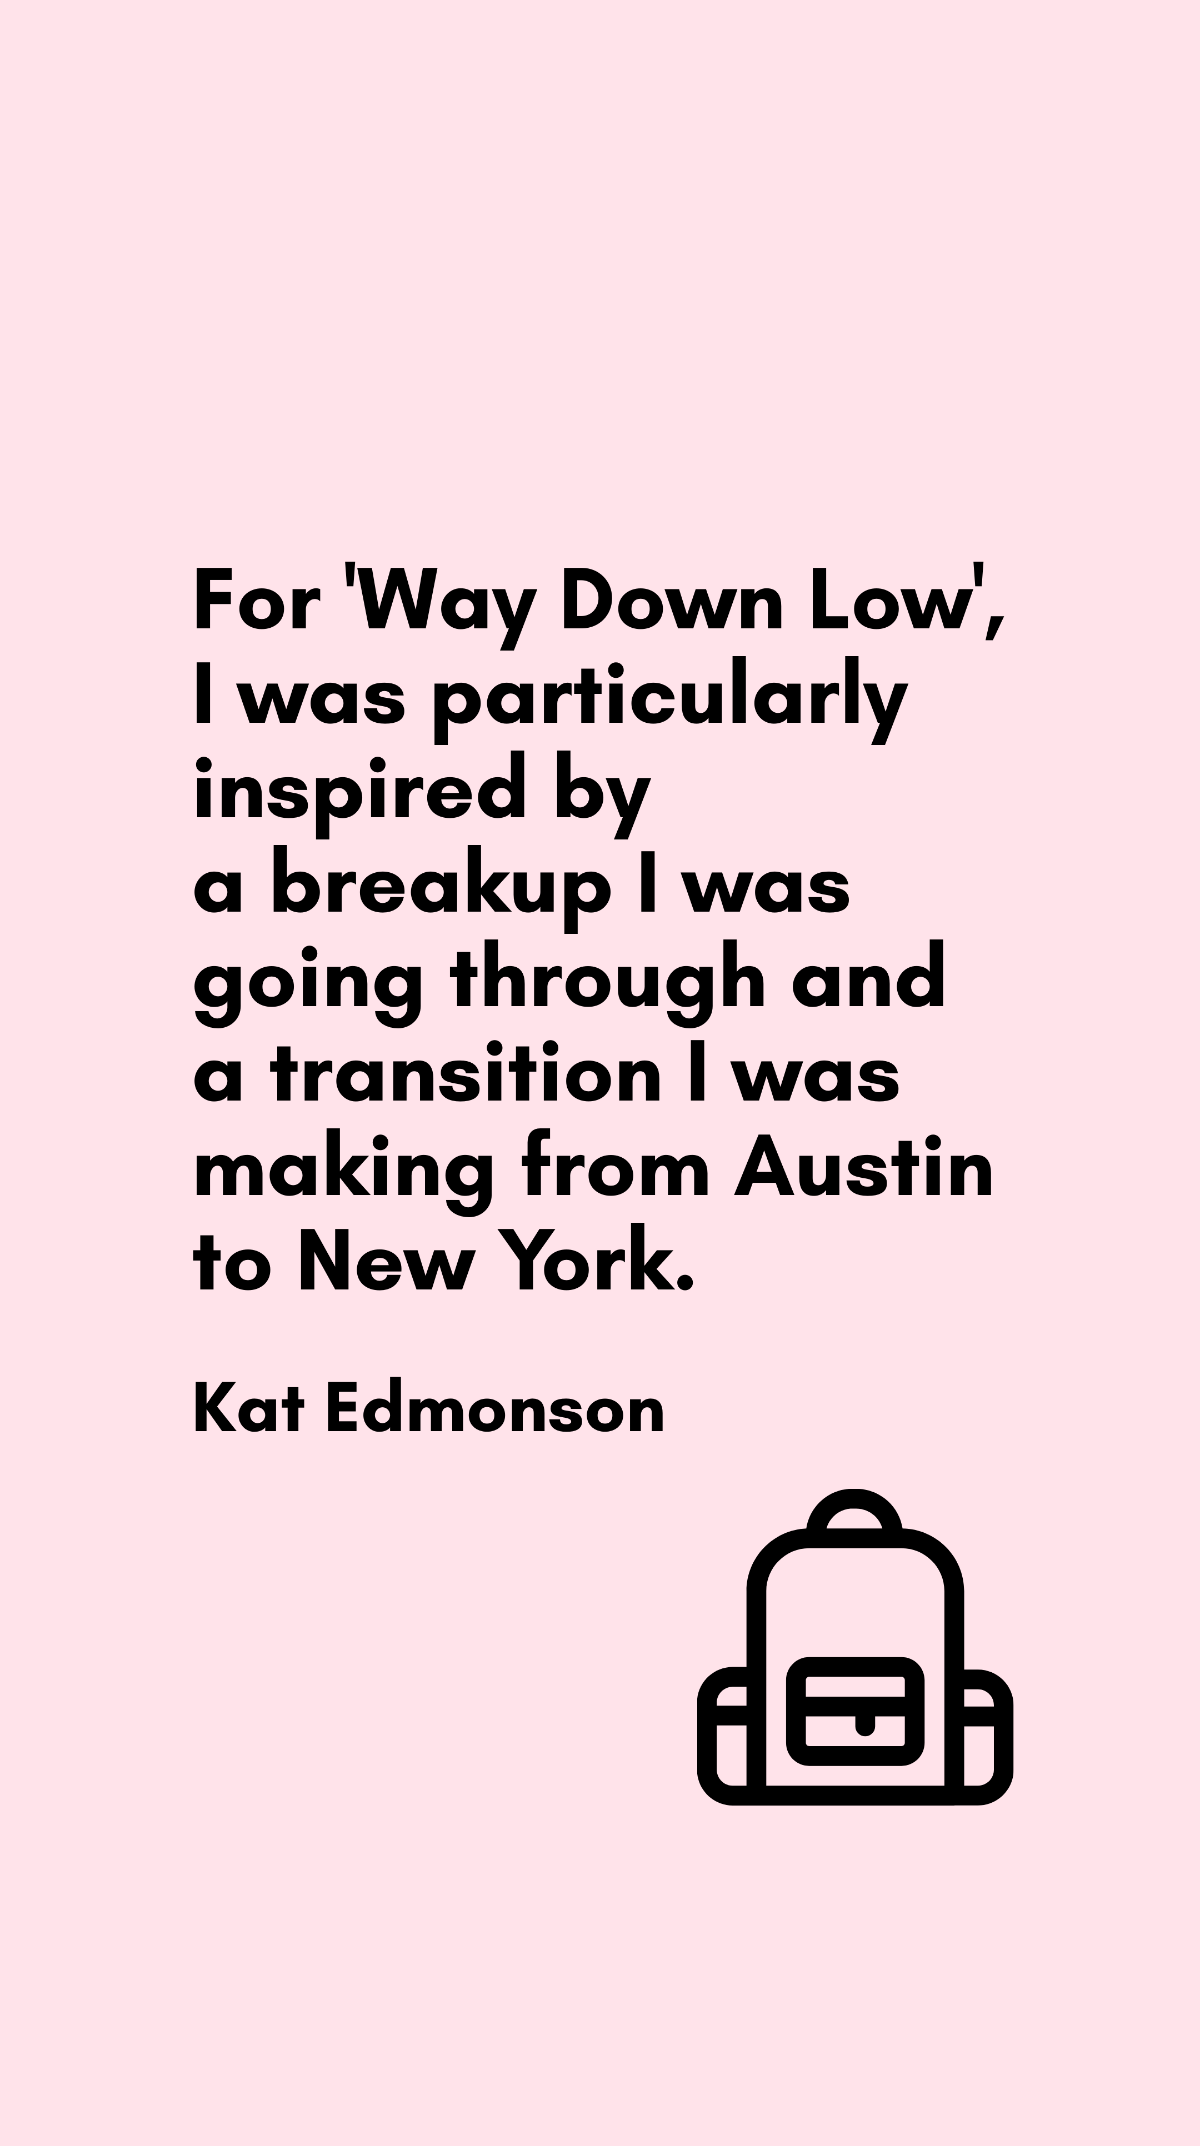 Kat Edmonson - For 'Way Down Low', I was particularly inspired by a breakup I was going through and a transition I was making from Austin to New York.